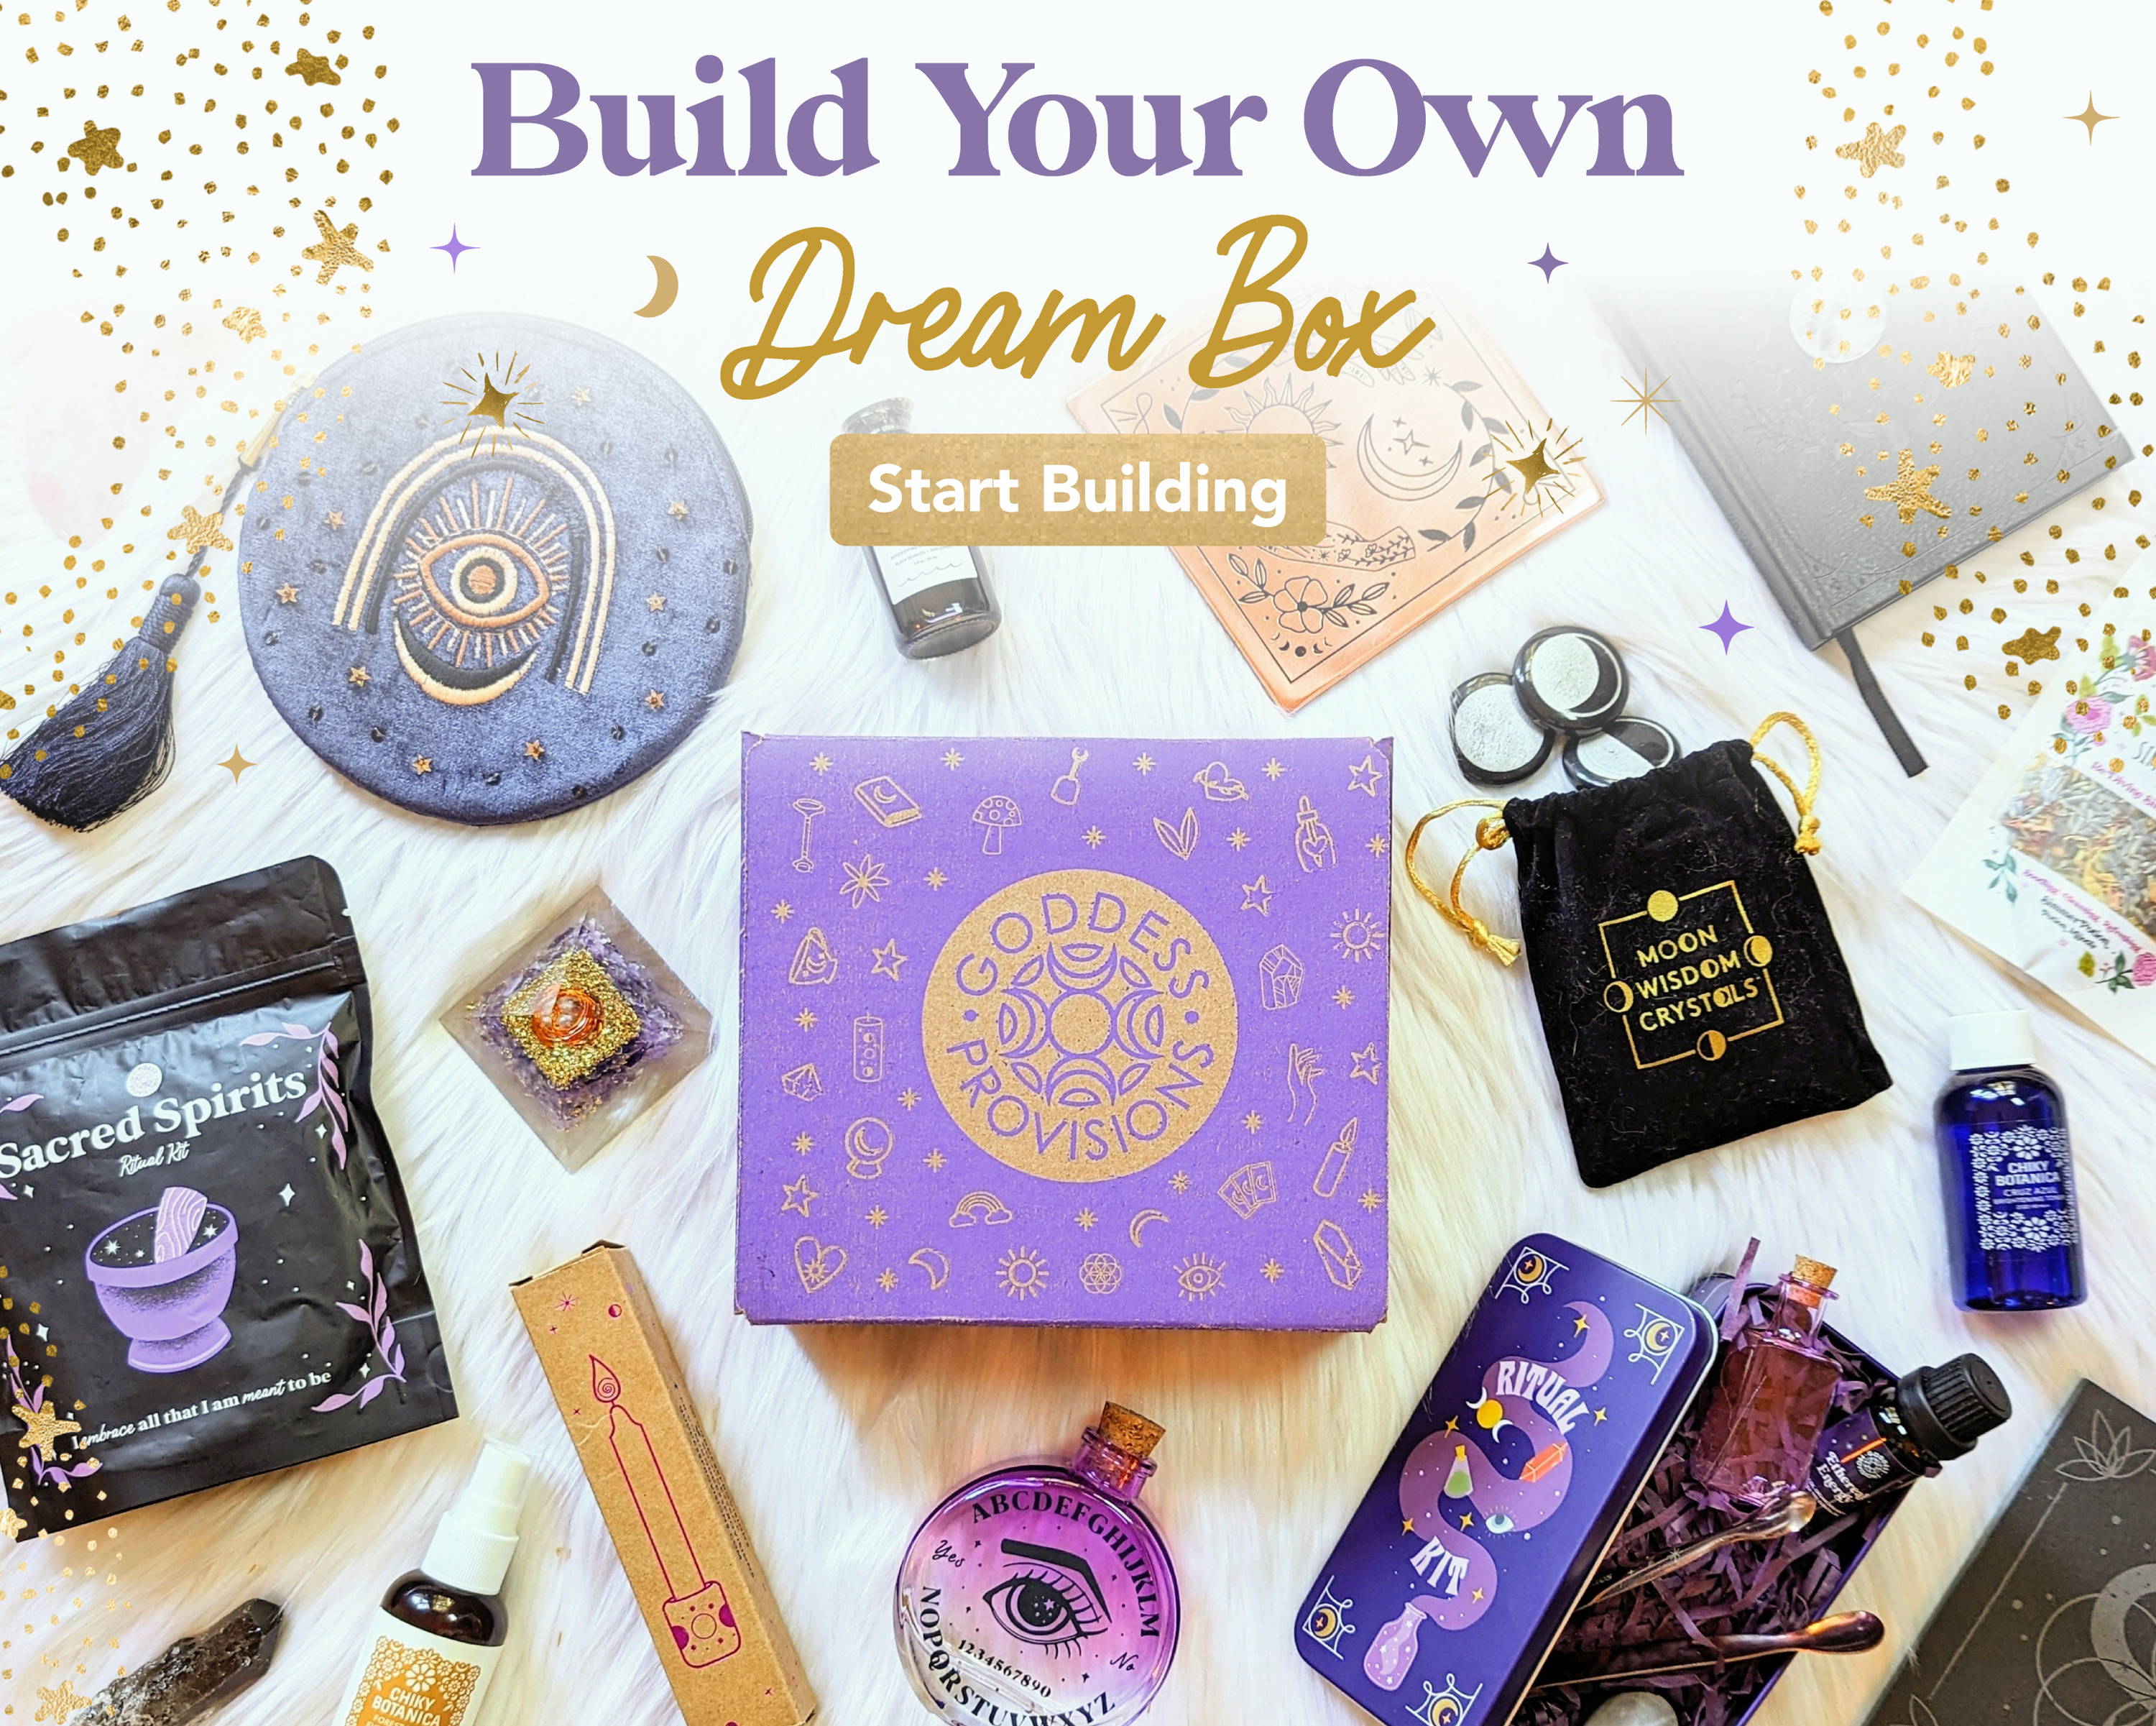 Build Your Own Dream Box